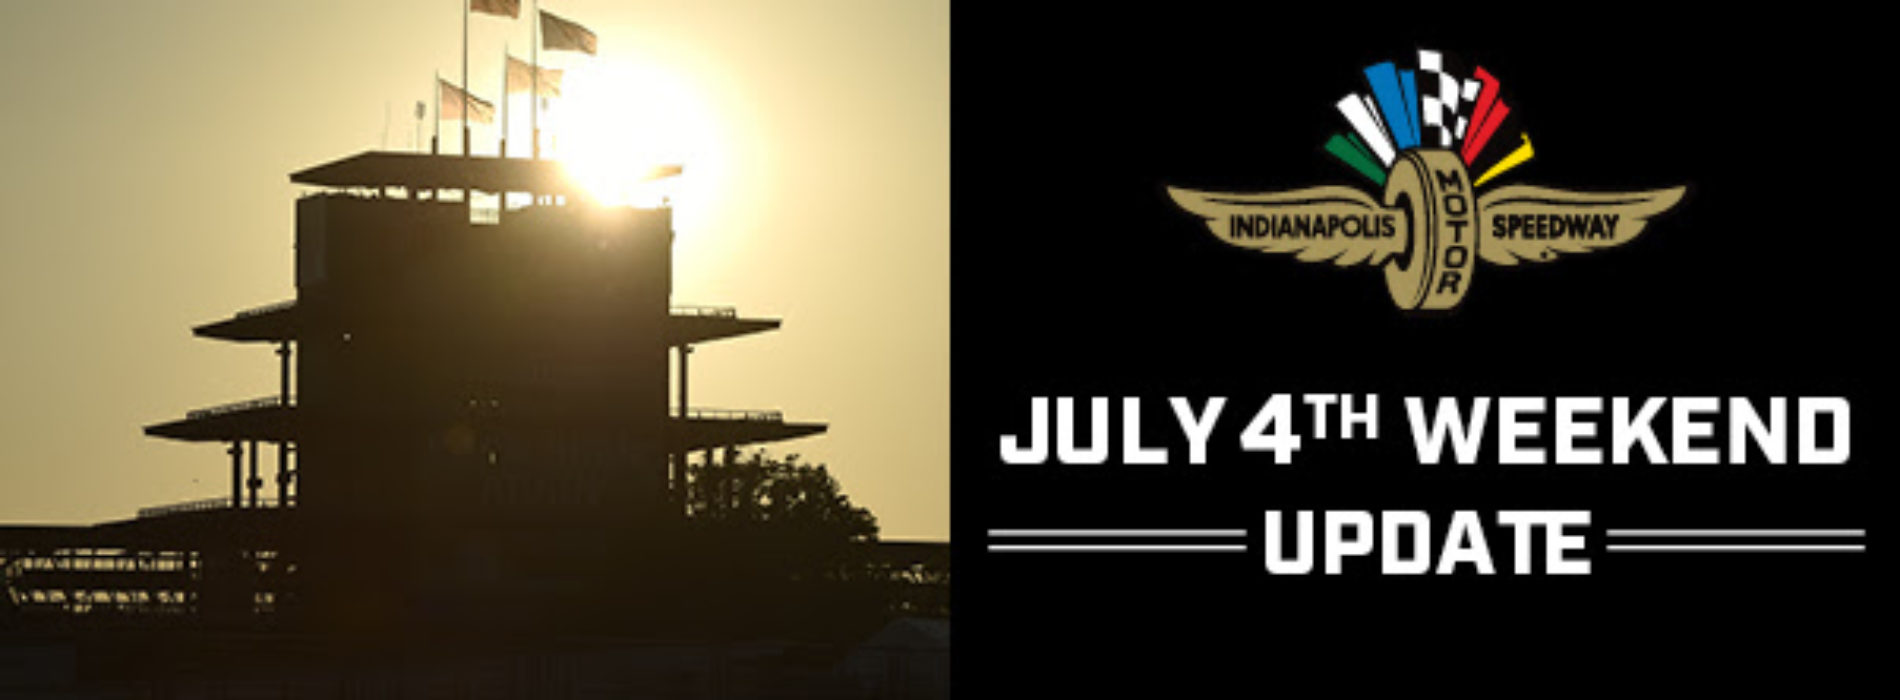 IMS Fourth of July Weekend Events To Run without Spectators